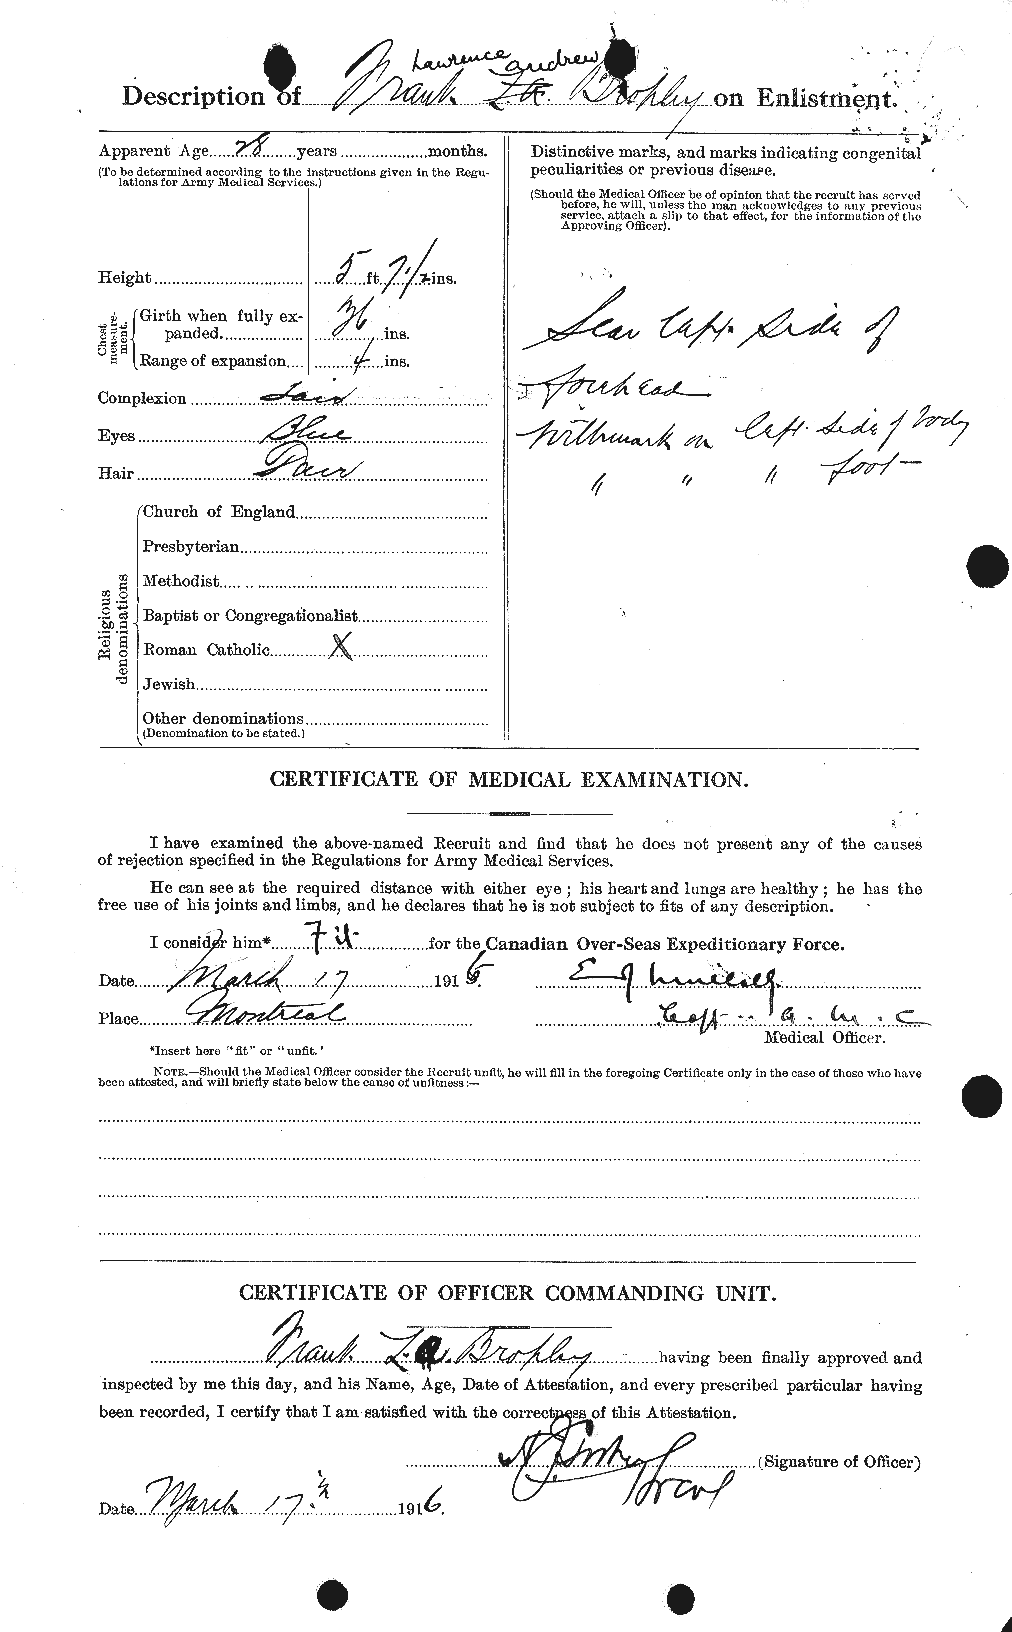 Personnel Records of the First World War - CEF 264862b